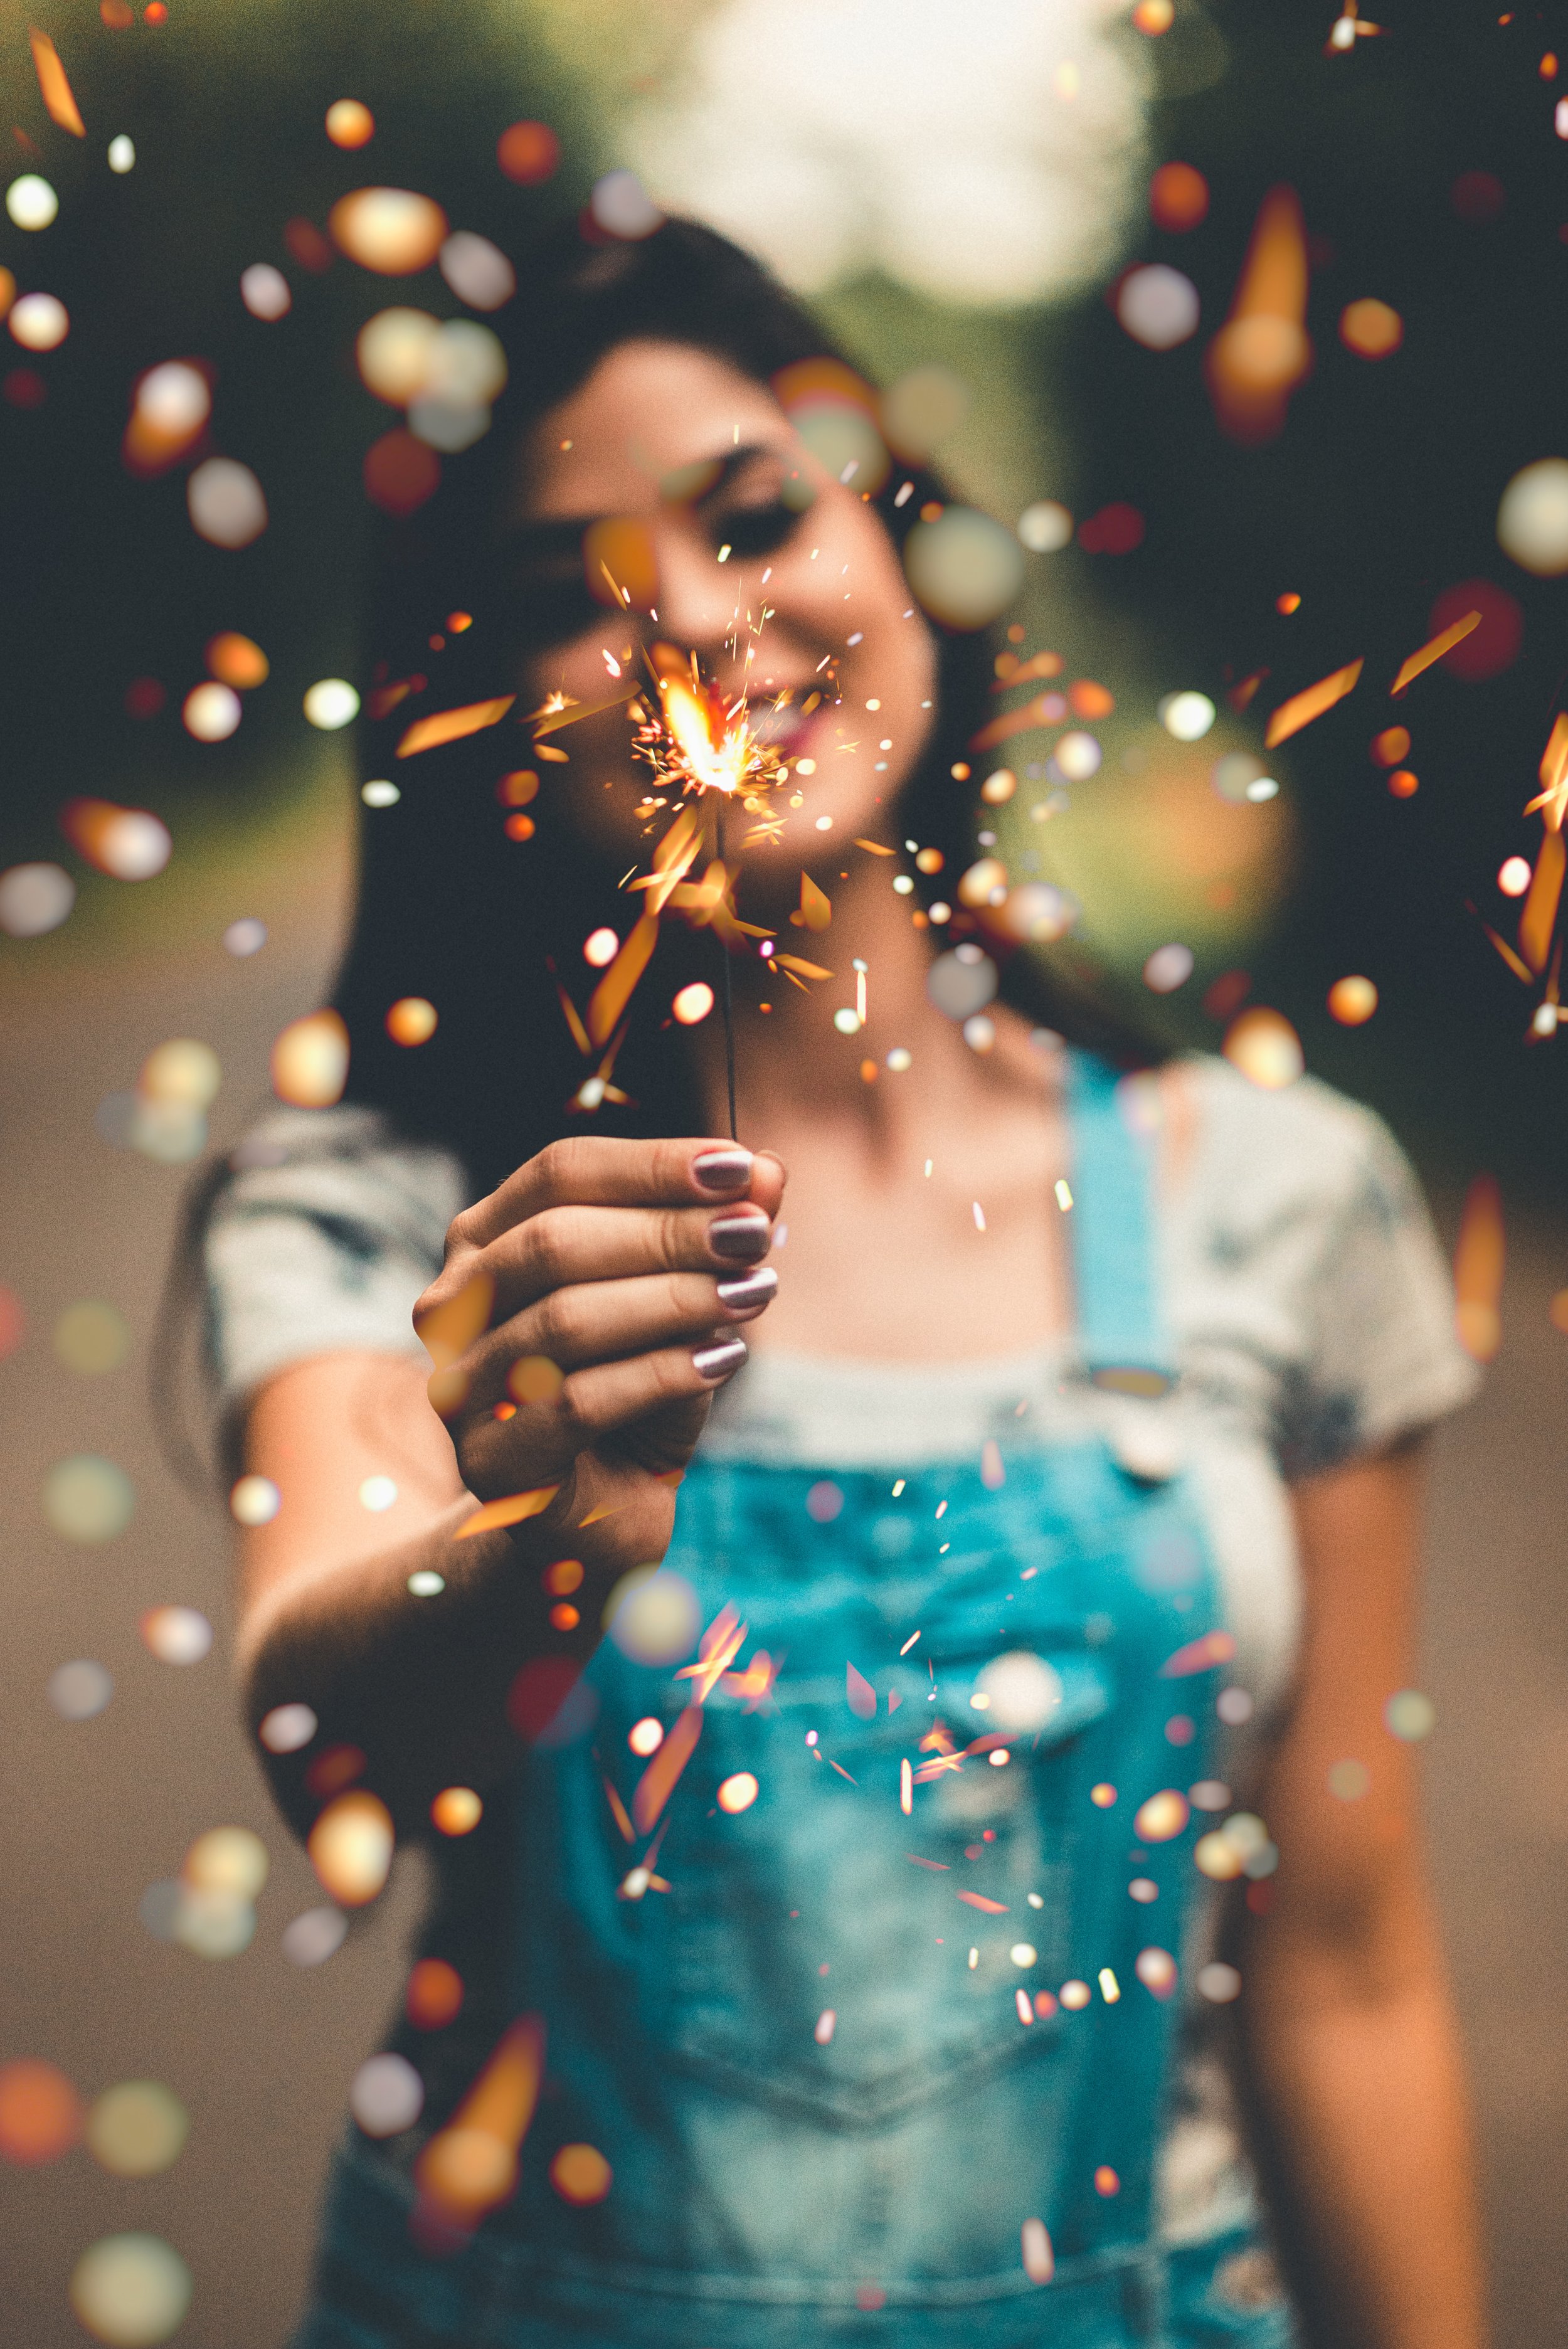 Celebration for New Year's. Photo by Murilo Folgosi on Pexels.